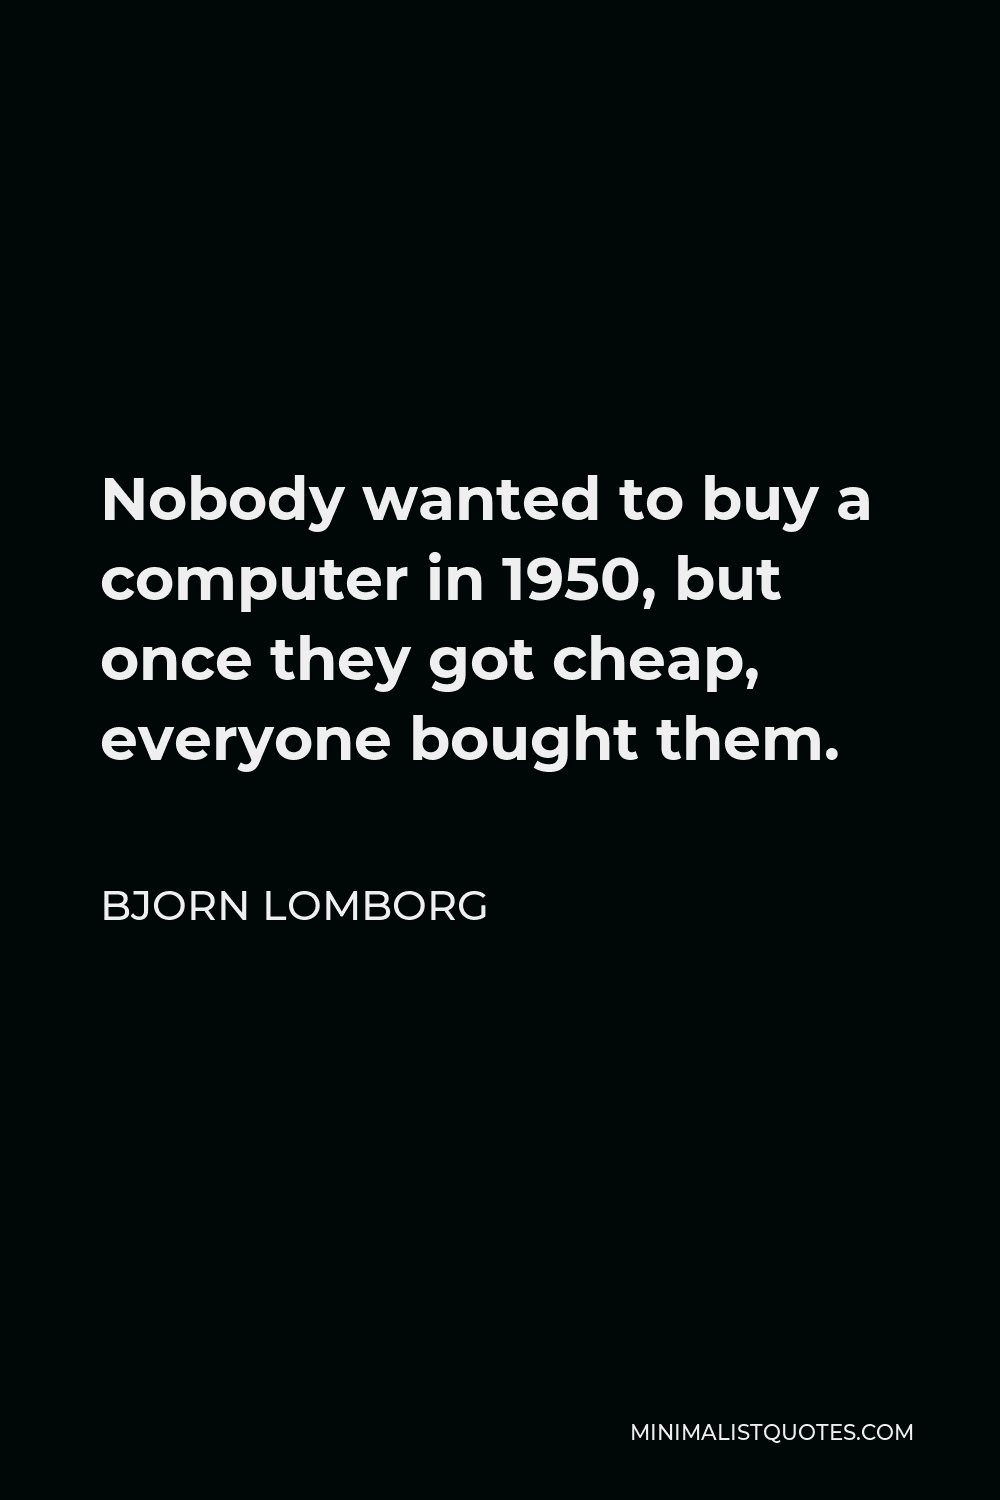 Bjorn Lomborg Quote - Nobody wanted to buy a computer in 1950, but once they got cheap, everyone bought them.